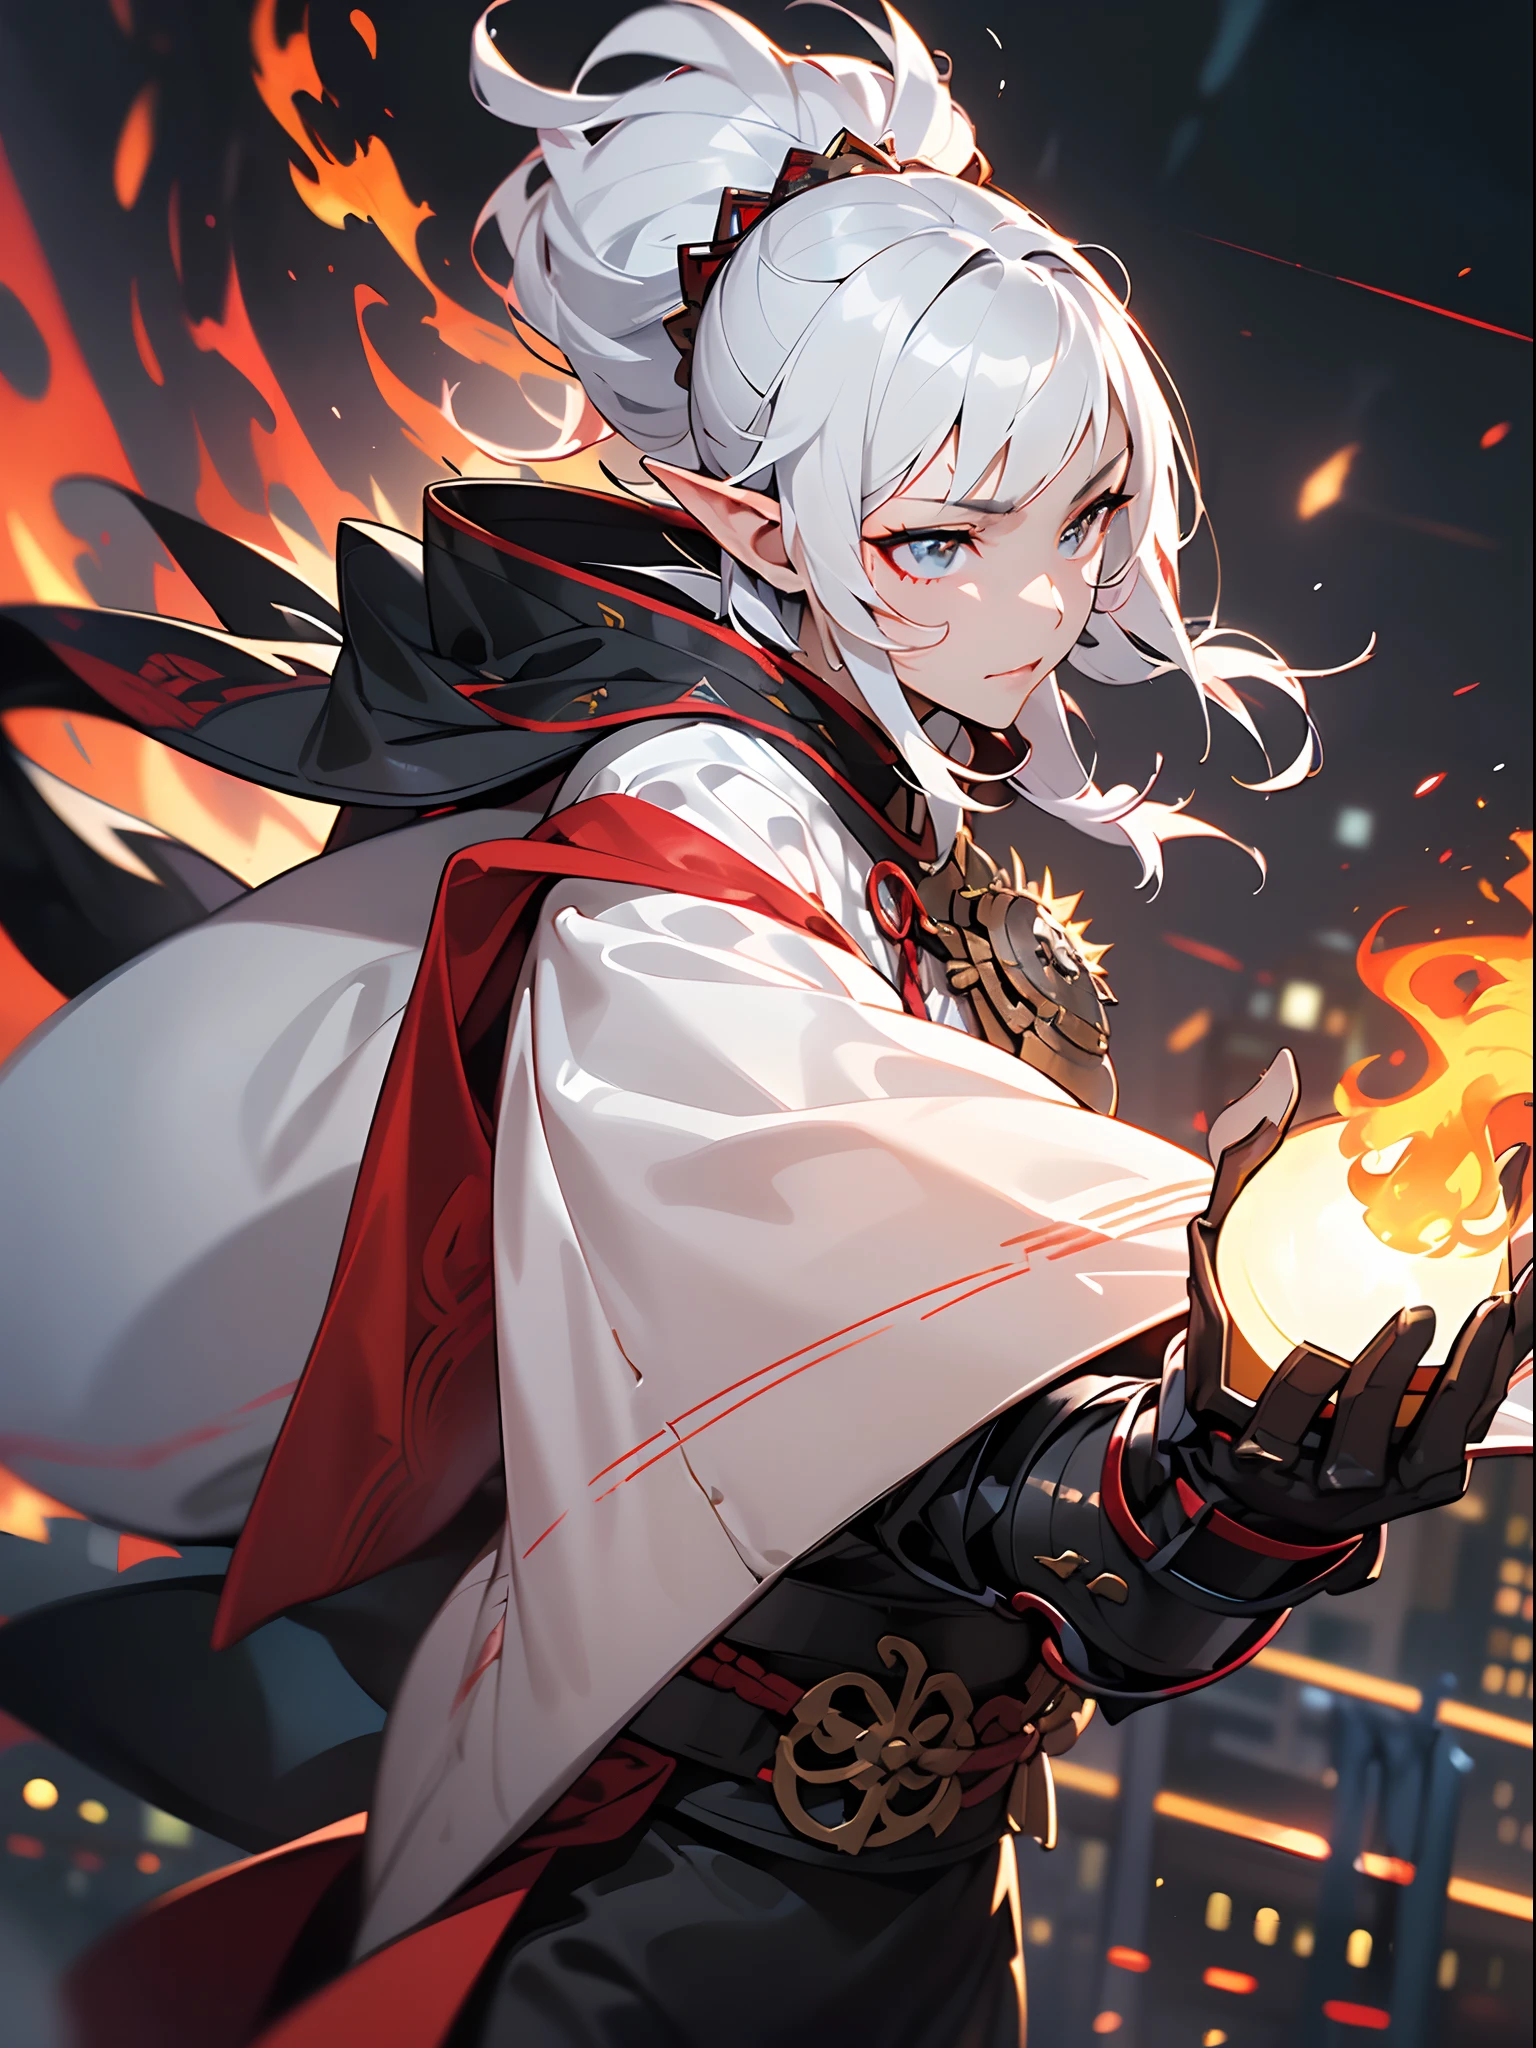 ((jpn)),((Best Quality)),((Beautifully painted)),((hight resolution)),1girl in,Luminescent beautiful elven daughter,(((onmyouji))),(((suikan))),((White cloak with red decoration)),Luminescent bushy silver-haired ponytail,(((black gauntlet and glove))),nice hand, Perfect hands,(((Fight black demon monsters in the streets of a big city on a blazing night))),((Flying flames)),armor,(face forcus),(((speed lines))),(((motion blur))),(((dynamic angle))),((cinematic lighting))